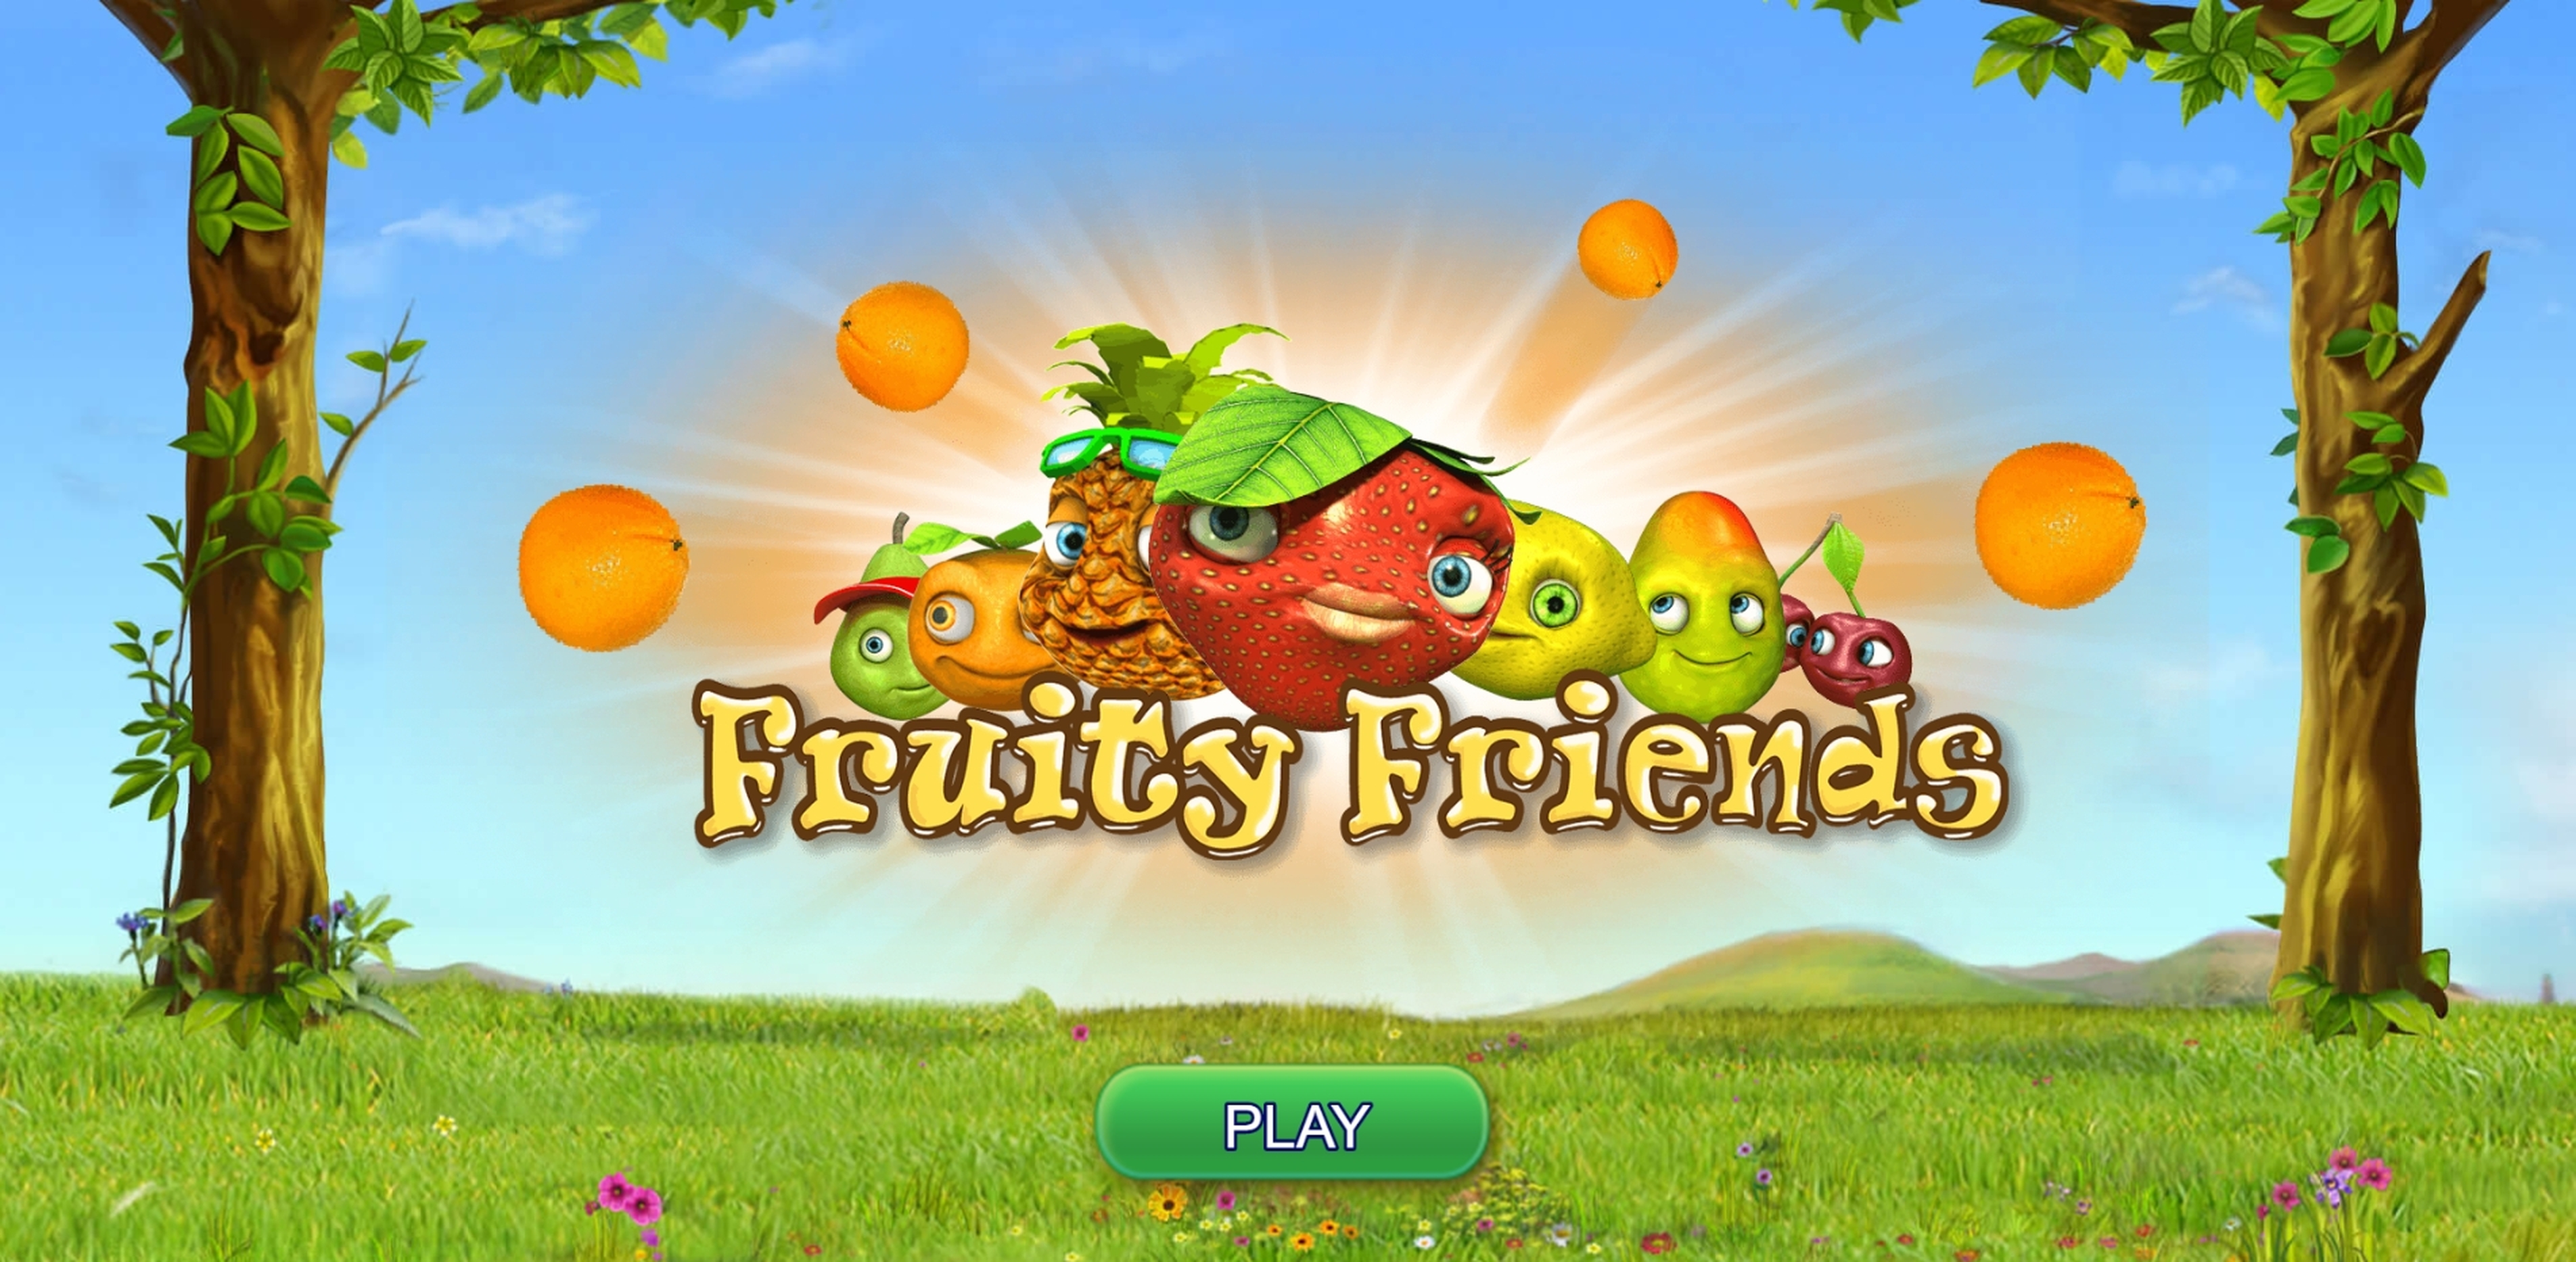 Play Fruity Friends Free Casino Slot Game by NeoGames